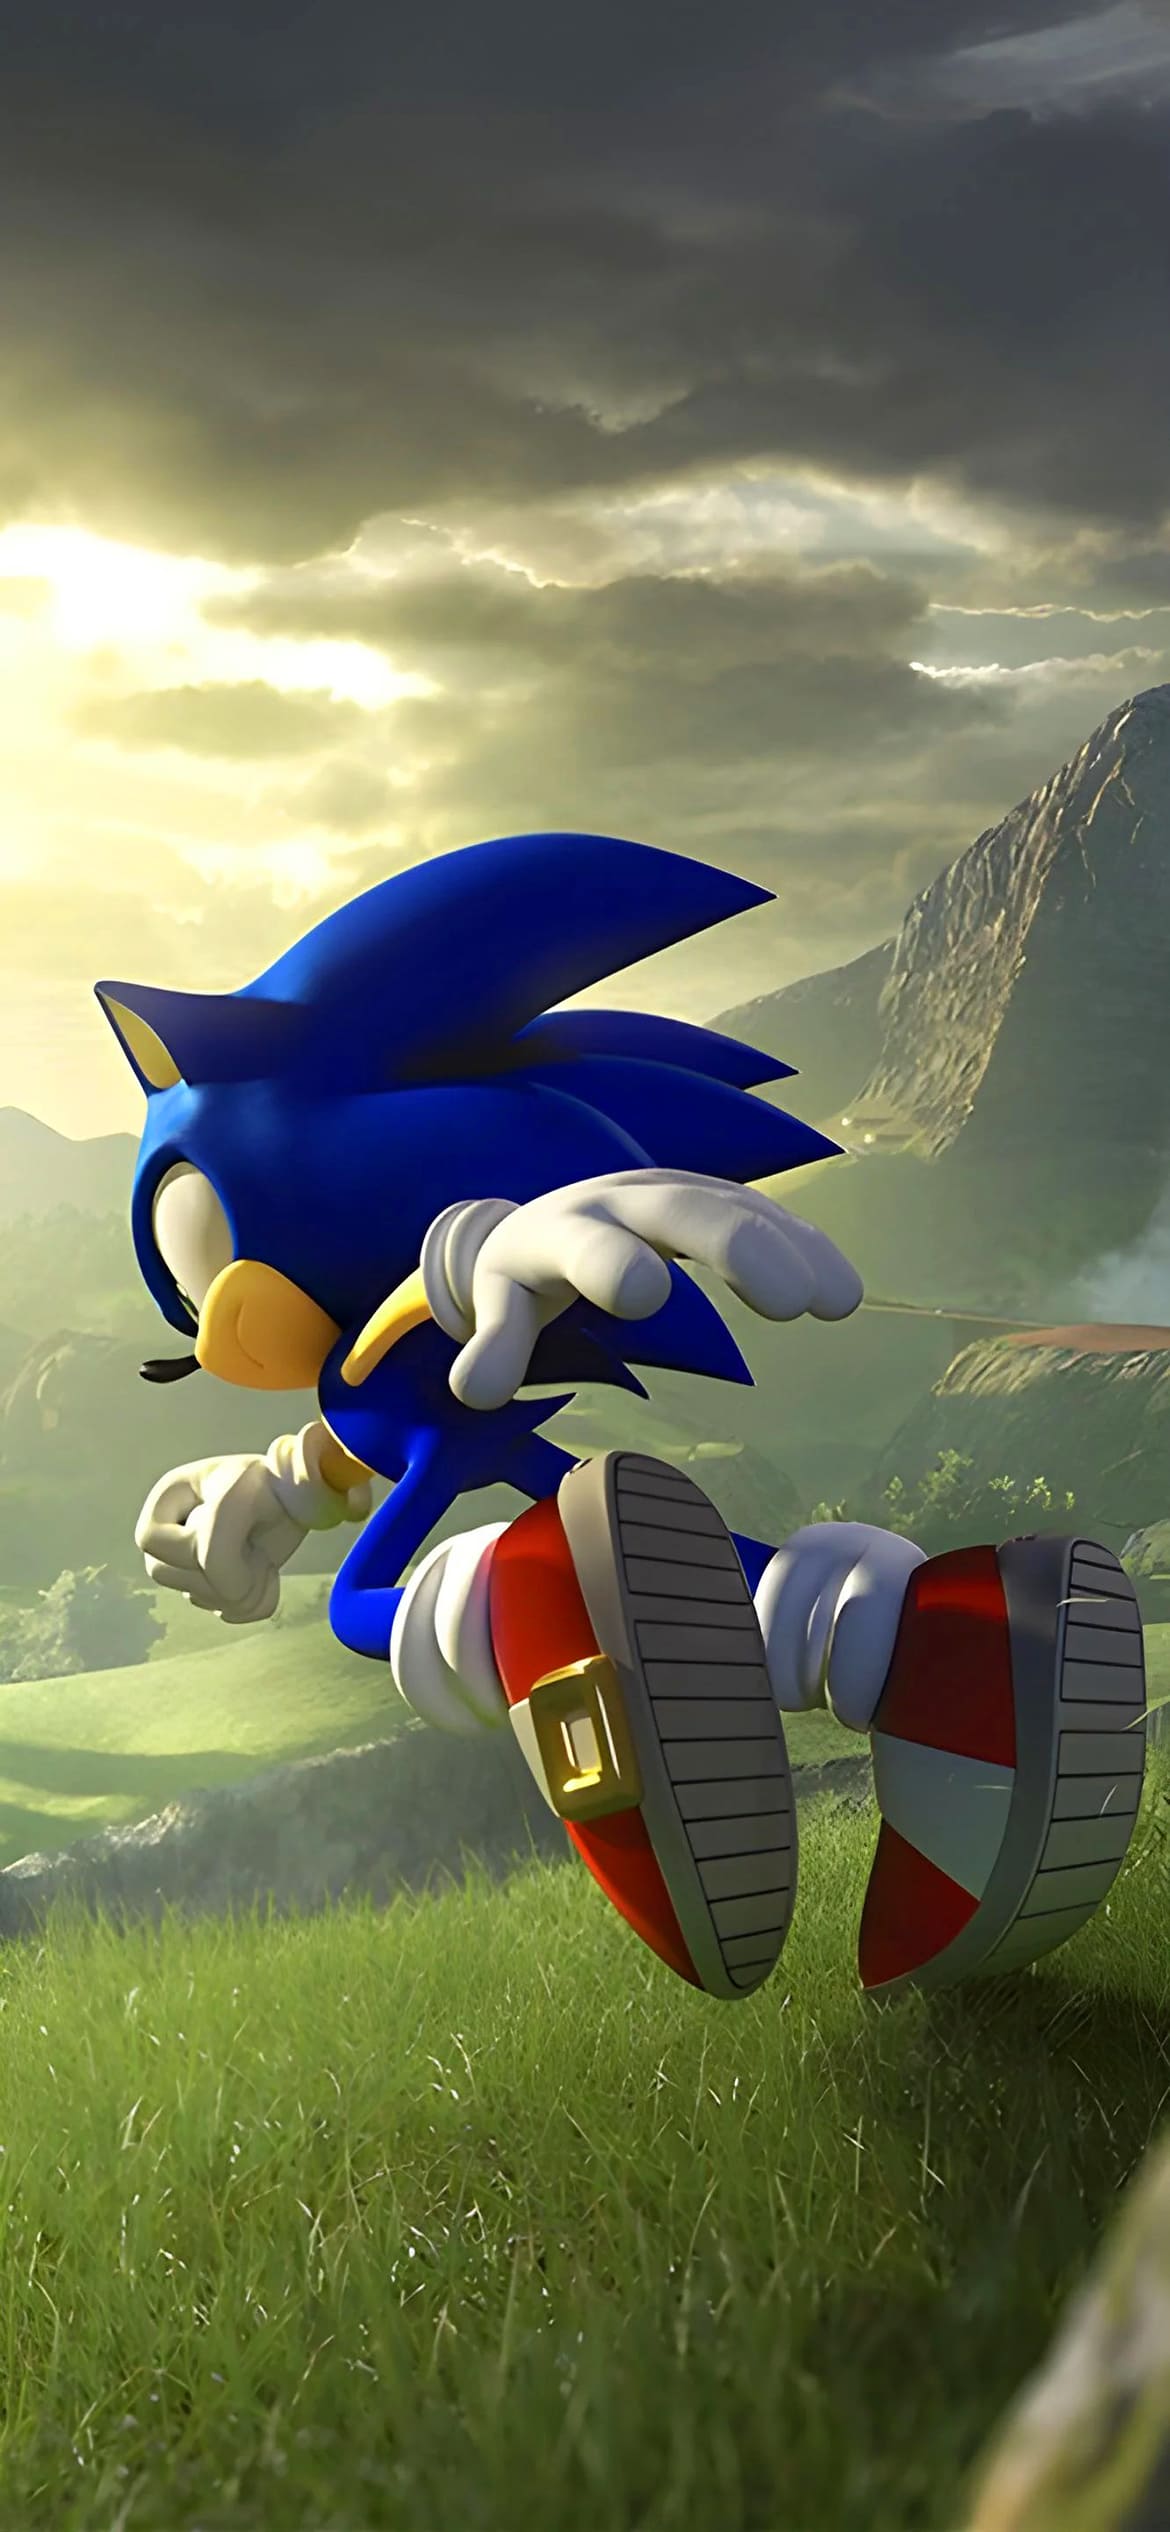 Sonic the Hedgehog running on a grassy hill with a dark sky in the background - Sonic